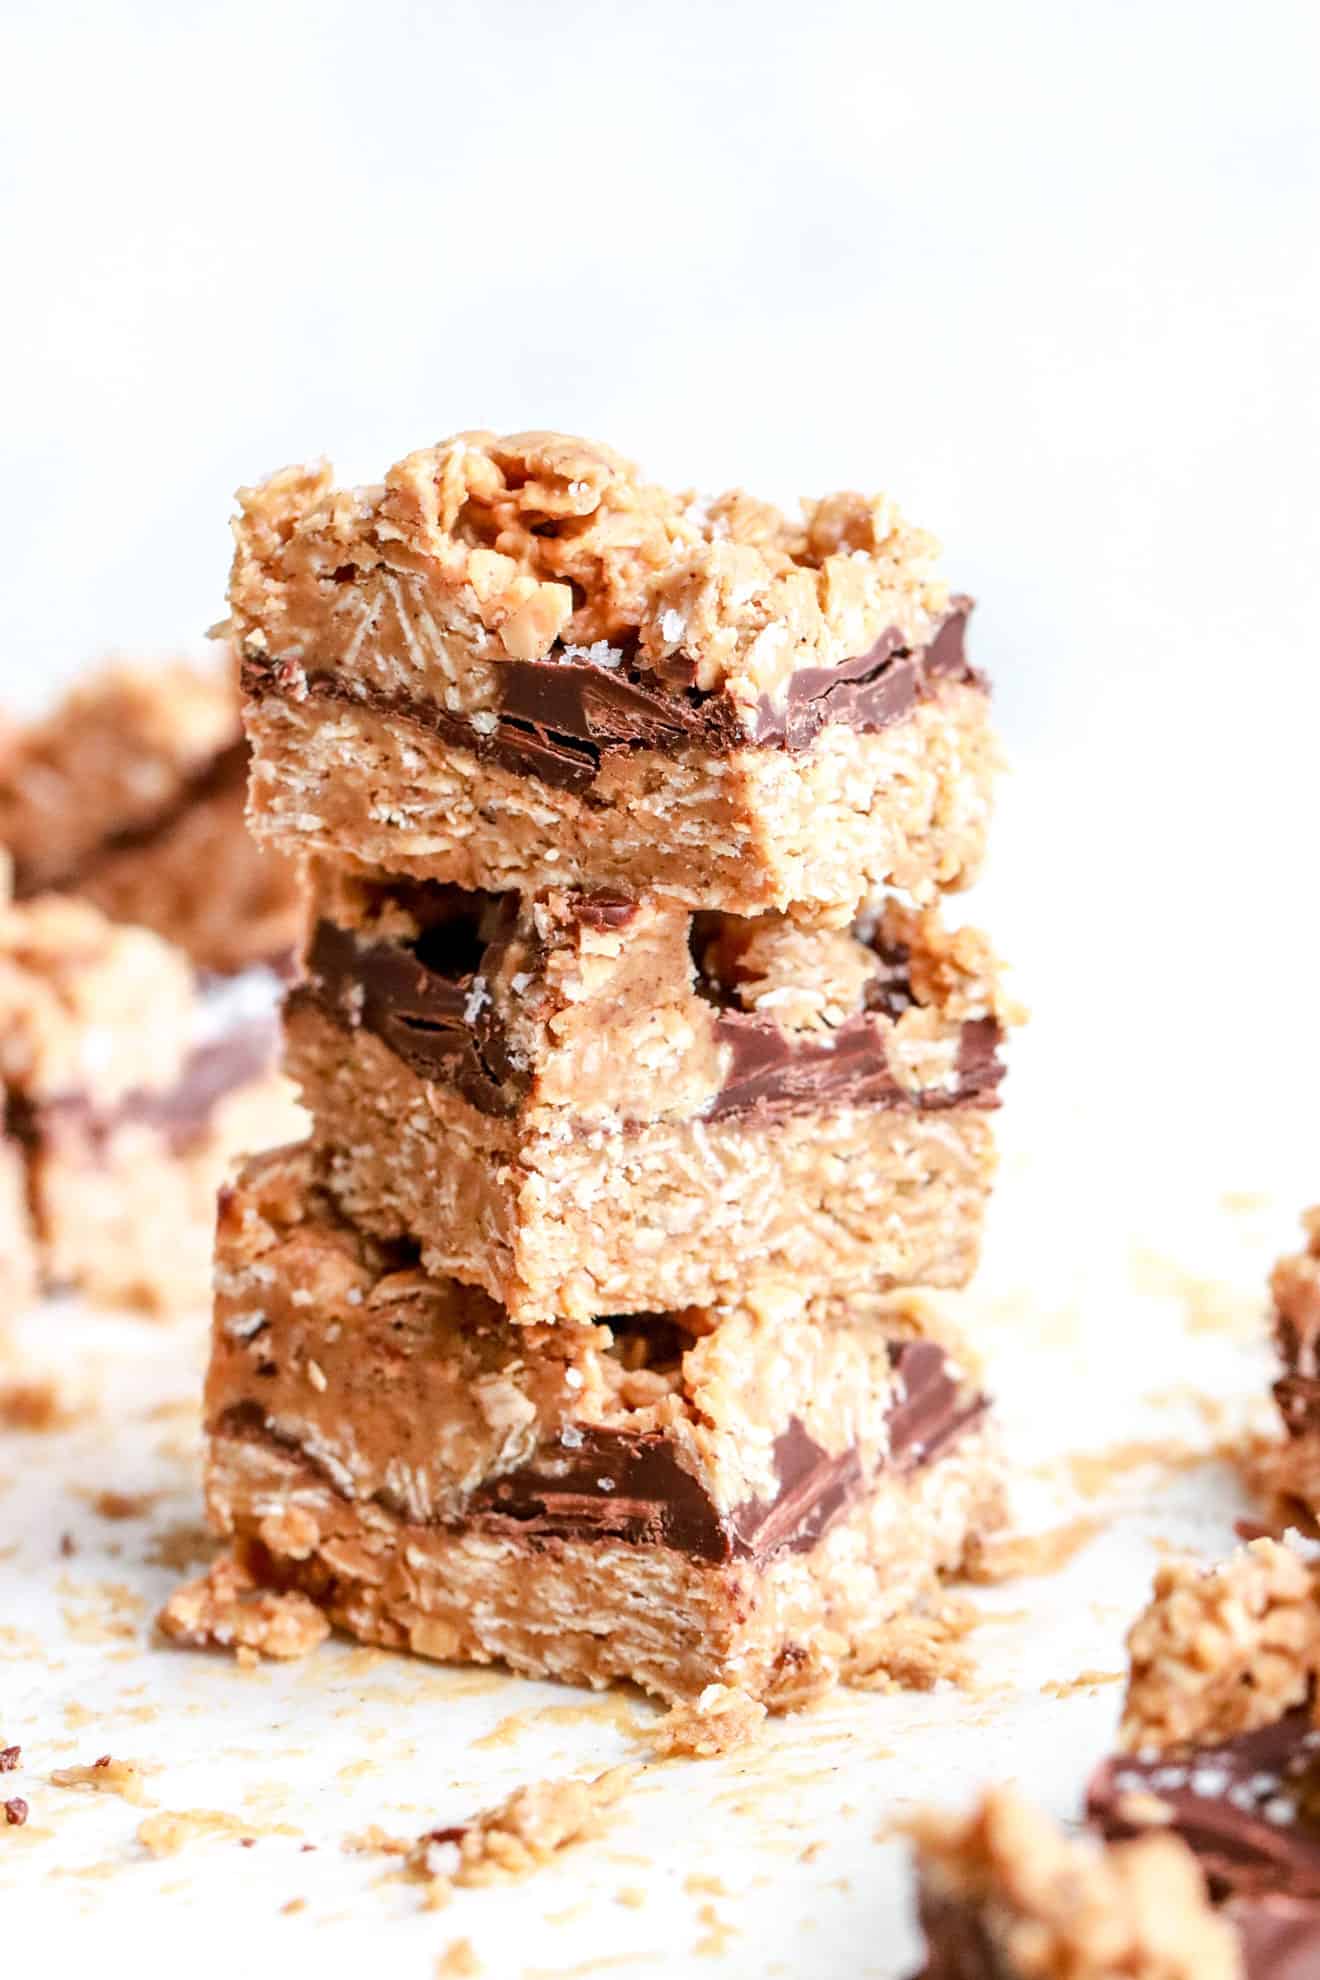 stack of no bake chocolate peanut butter oatmeal bars with bars in the foreground and background on white table and background